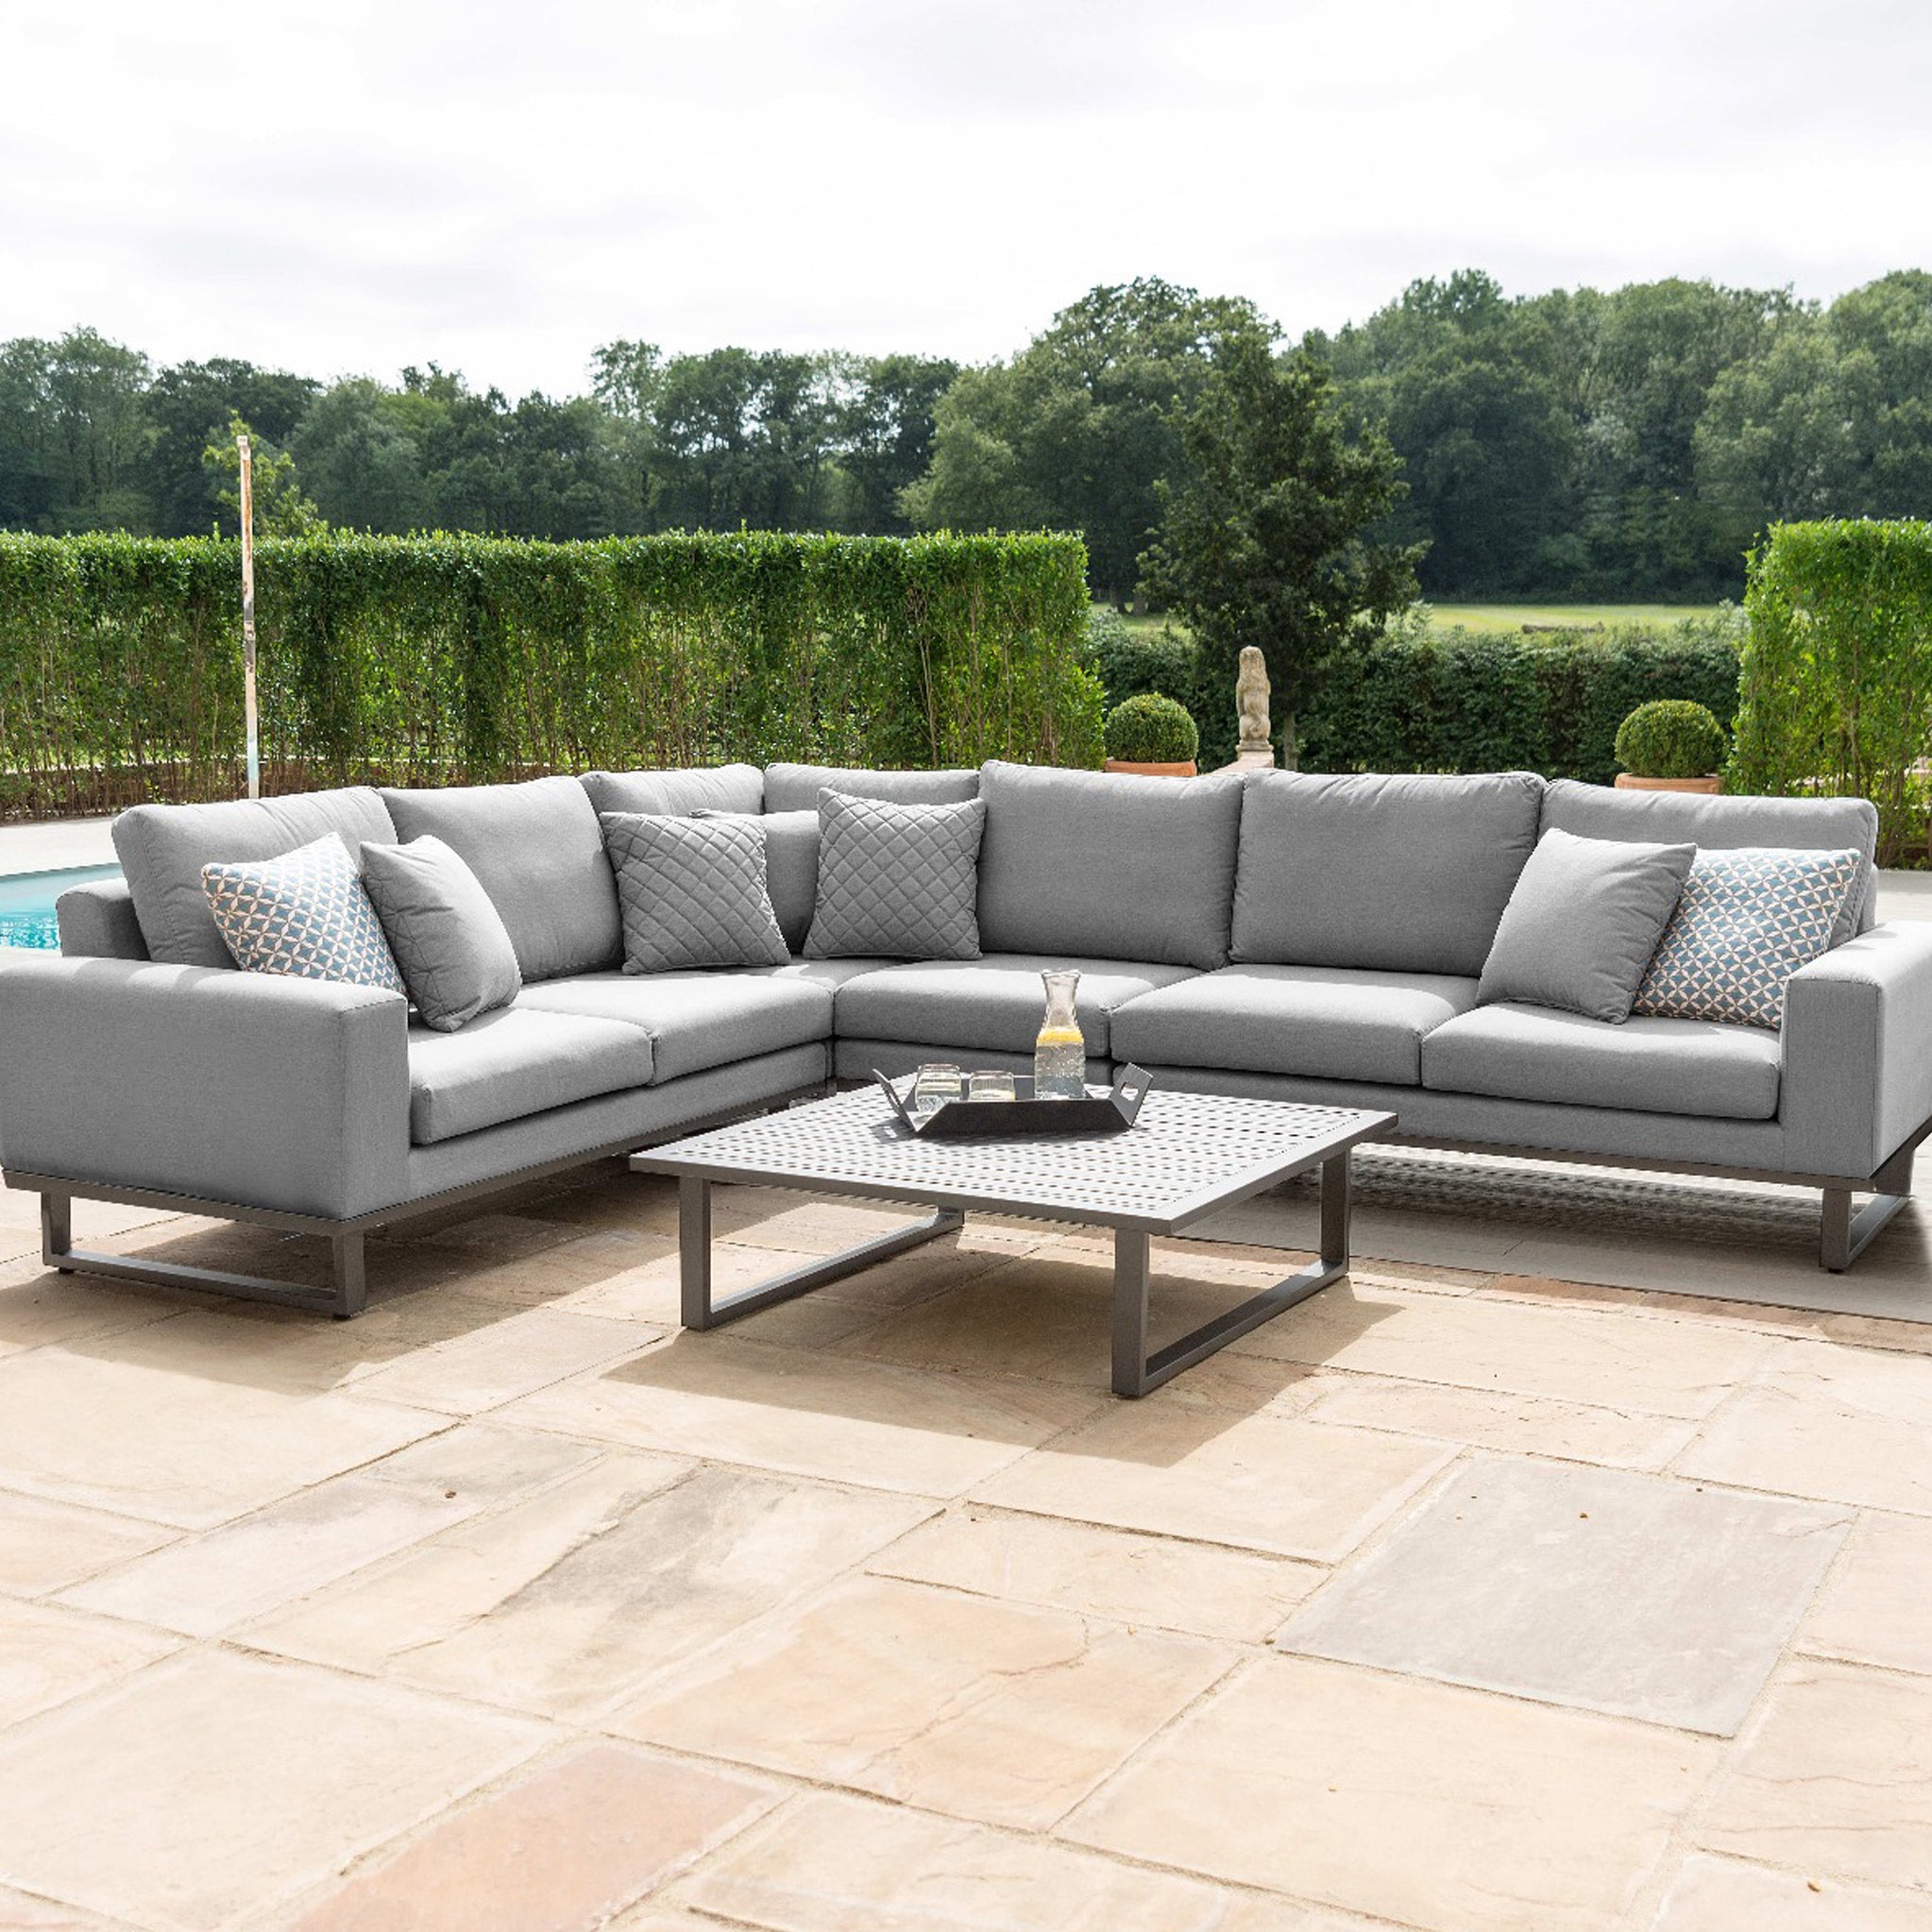 Maze Ethos Large Outdoor Corner Sofa Group With Coffee Table Roseland